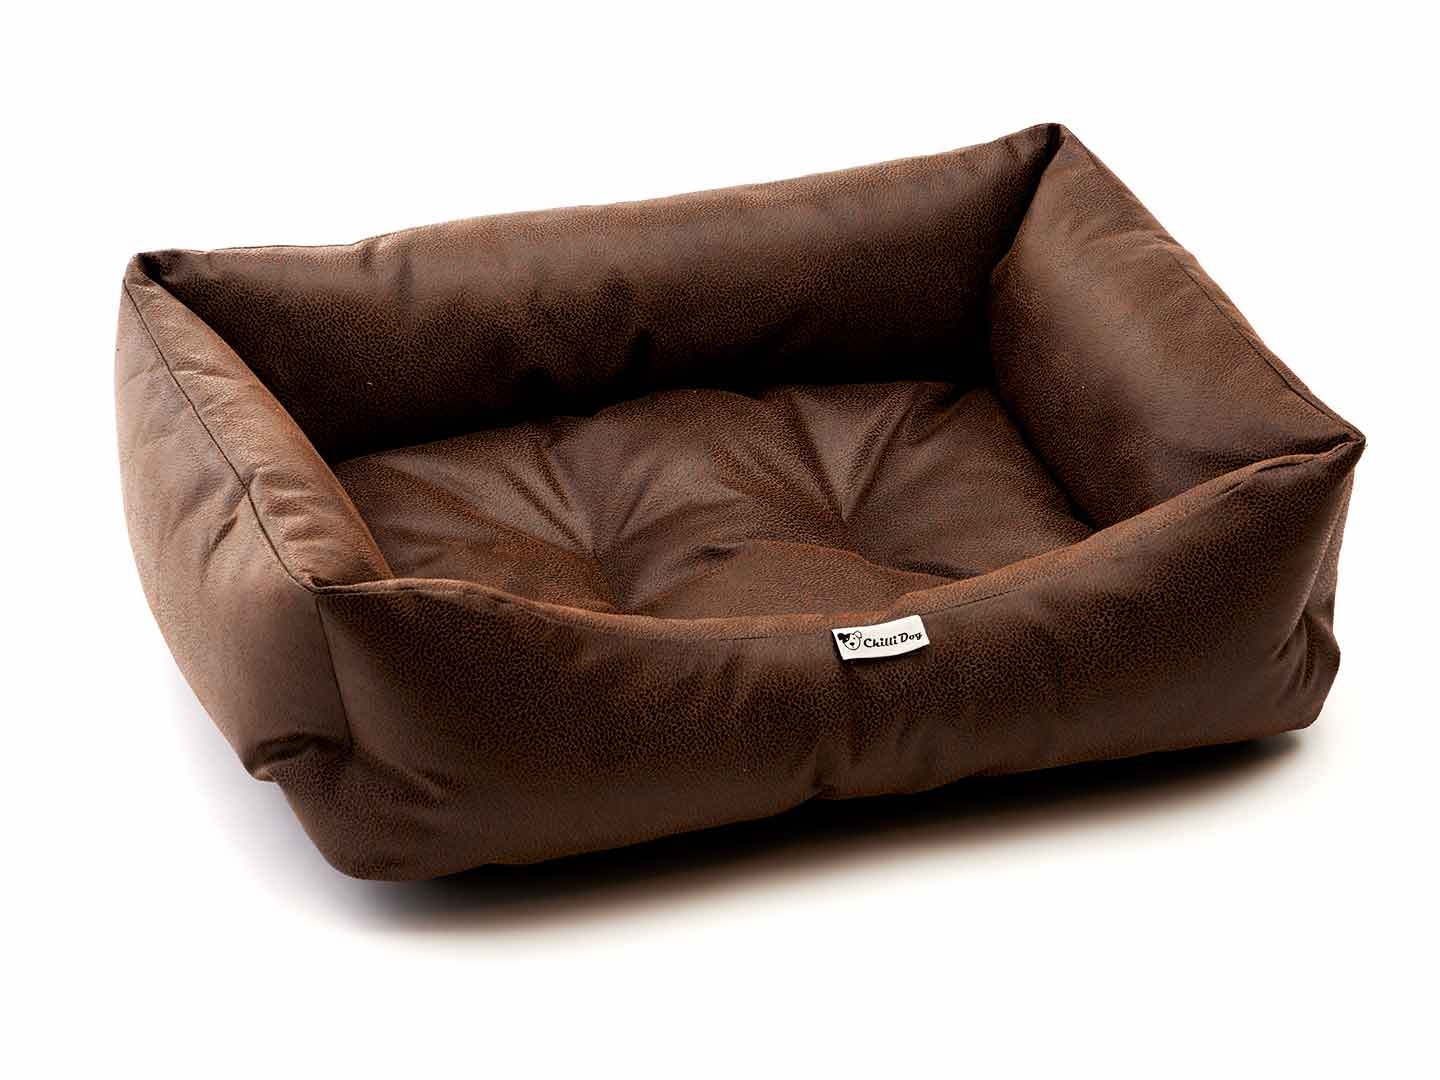 Chilli Dog Black Brown Faux Leather, Leather Pet Bed